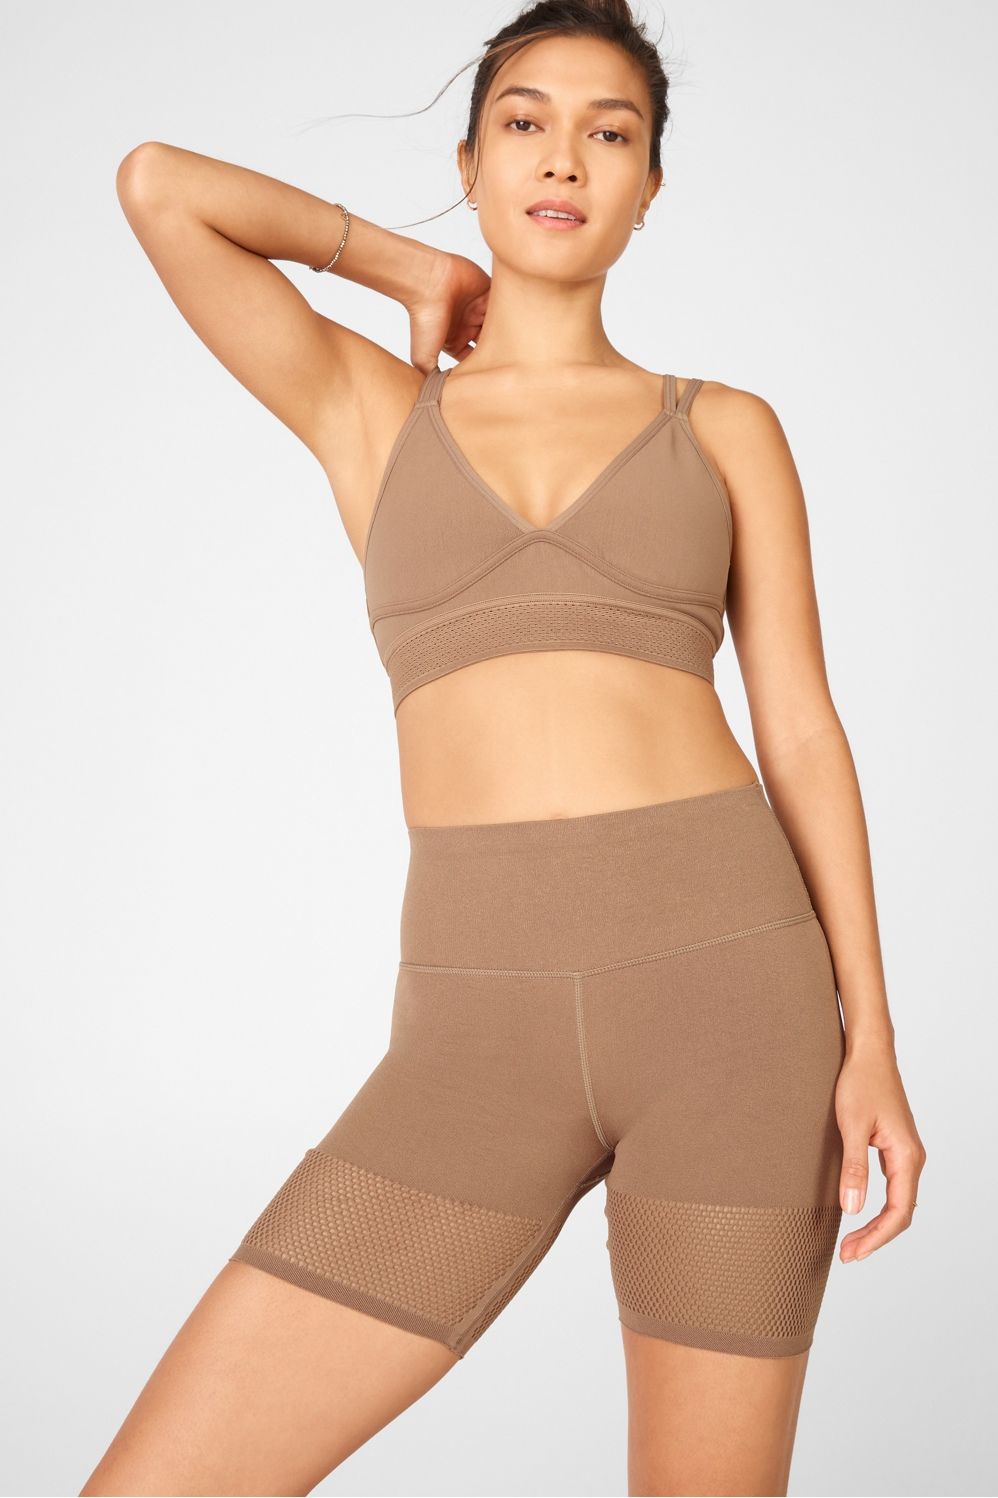 Outfits
					
				
					
										
				
	
				/
			
		
	
 
					
						Magnetic 2-Piece Outfit
	... | Fabletics